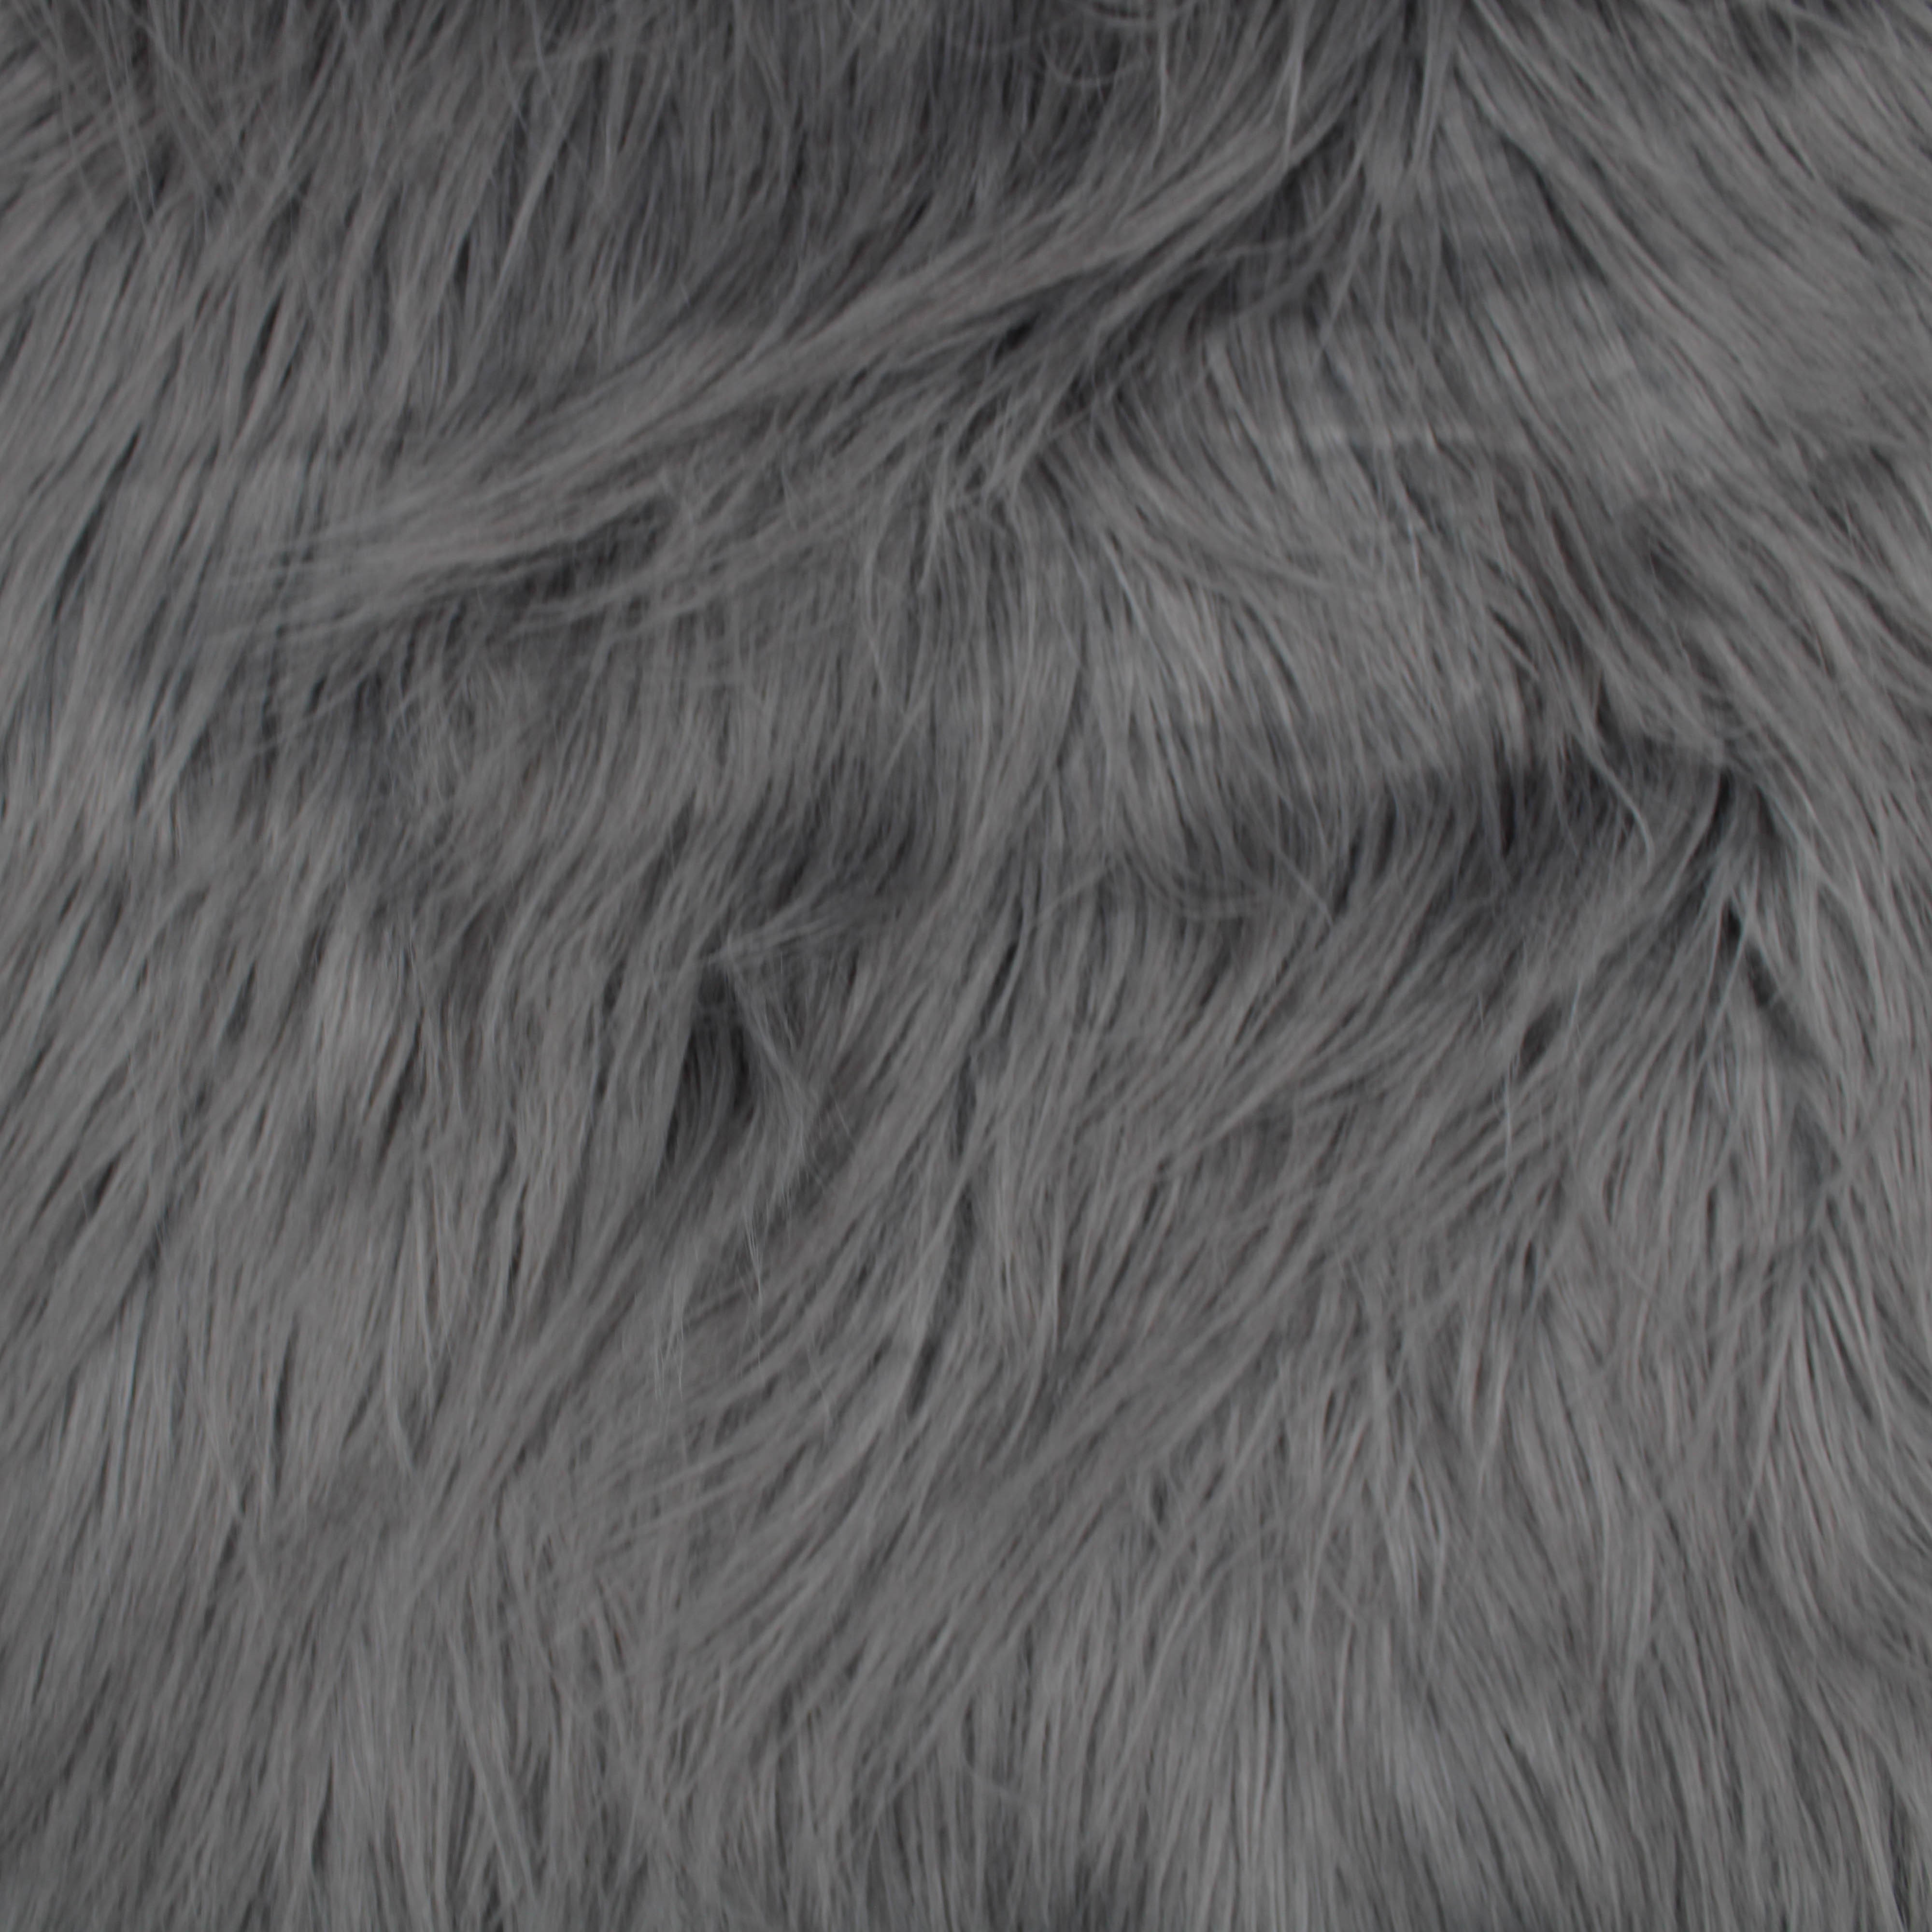 Faux Fur Long Pile Wild Rabbit Black Ivory Fabric  60 Wide  Sold by the Yard